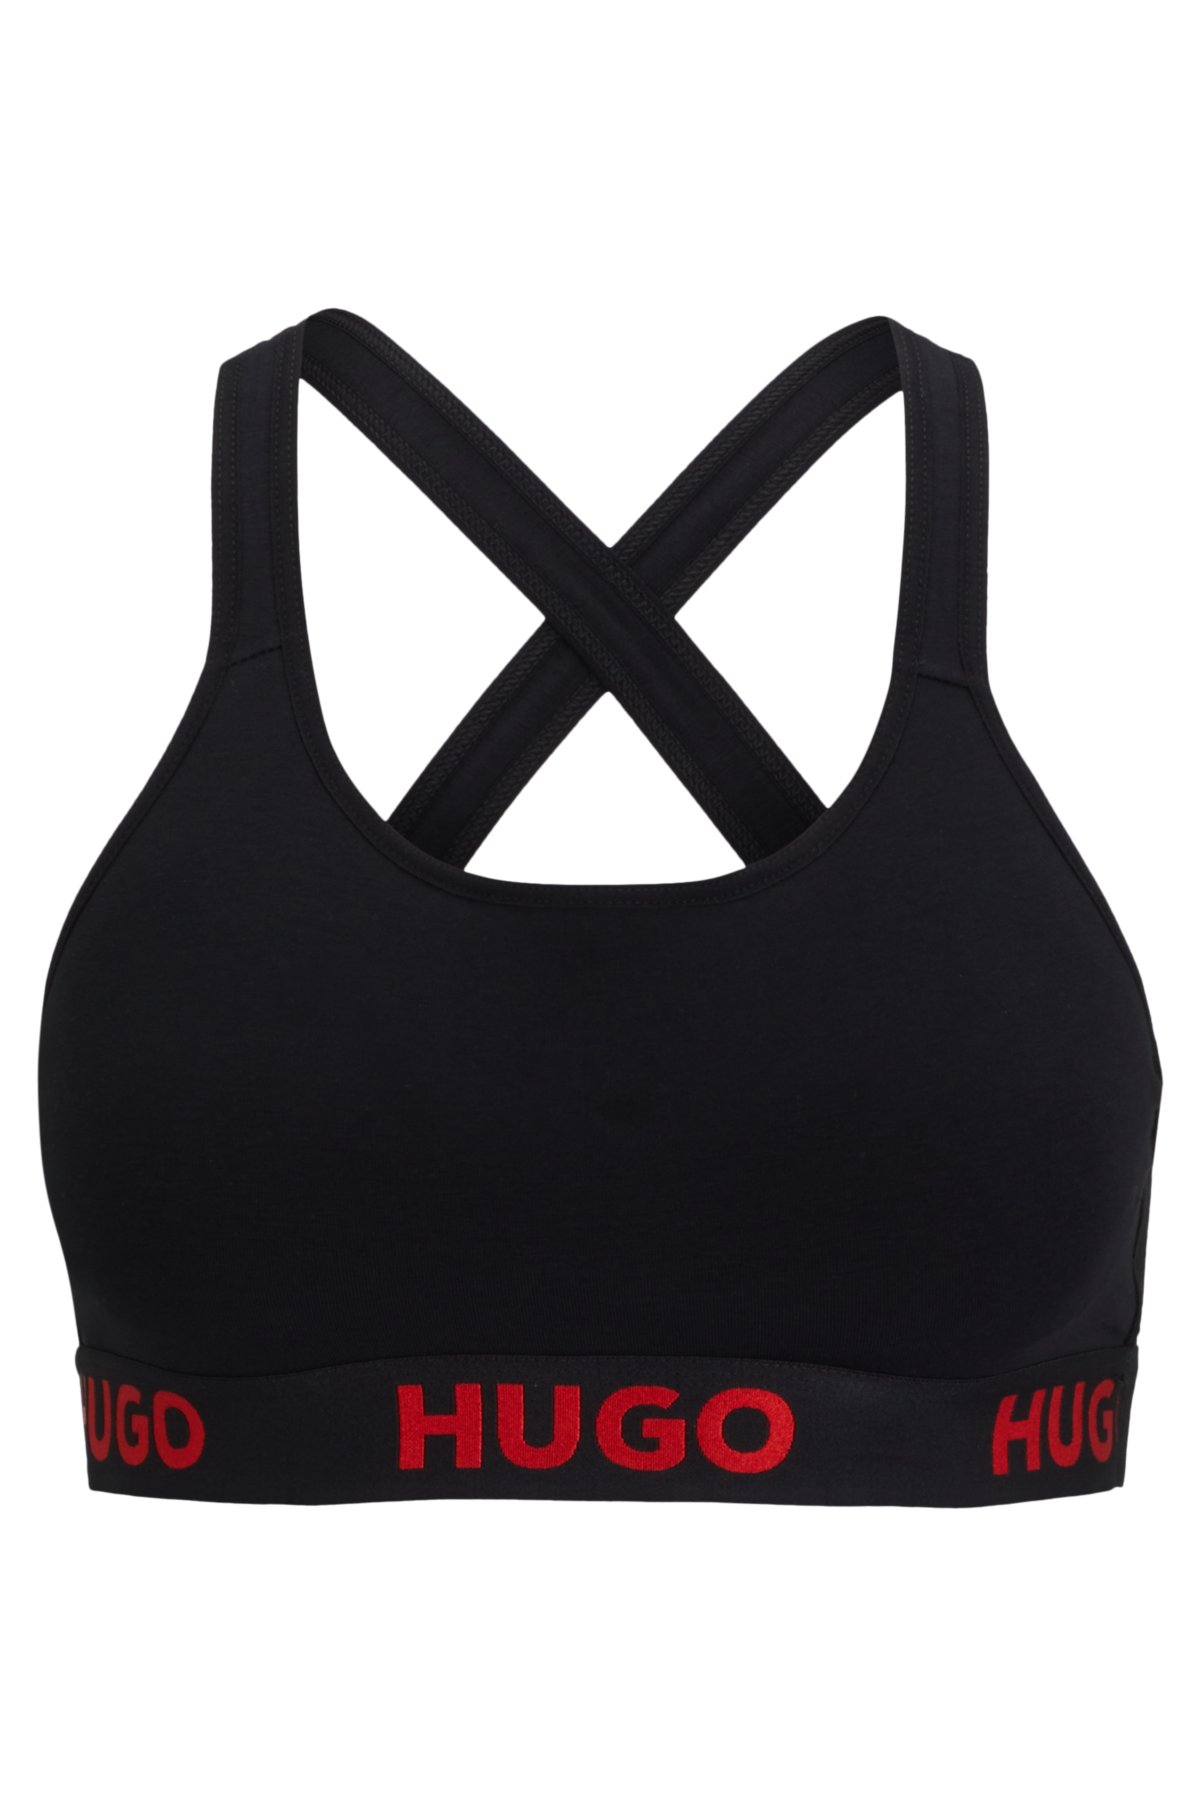 HUGO - repeat logos Sports bra stretch with cotton in